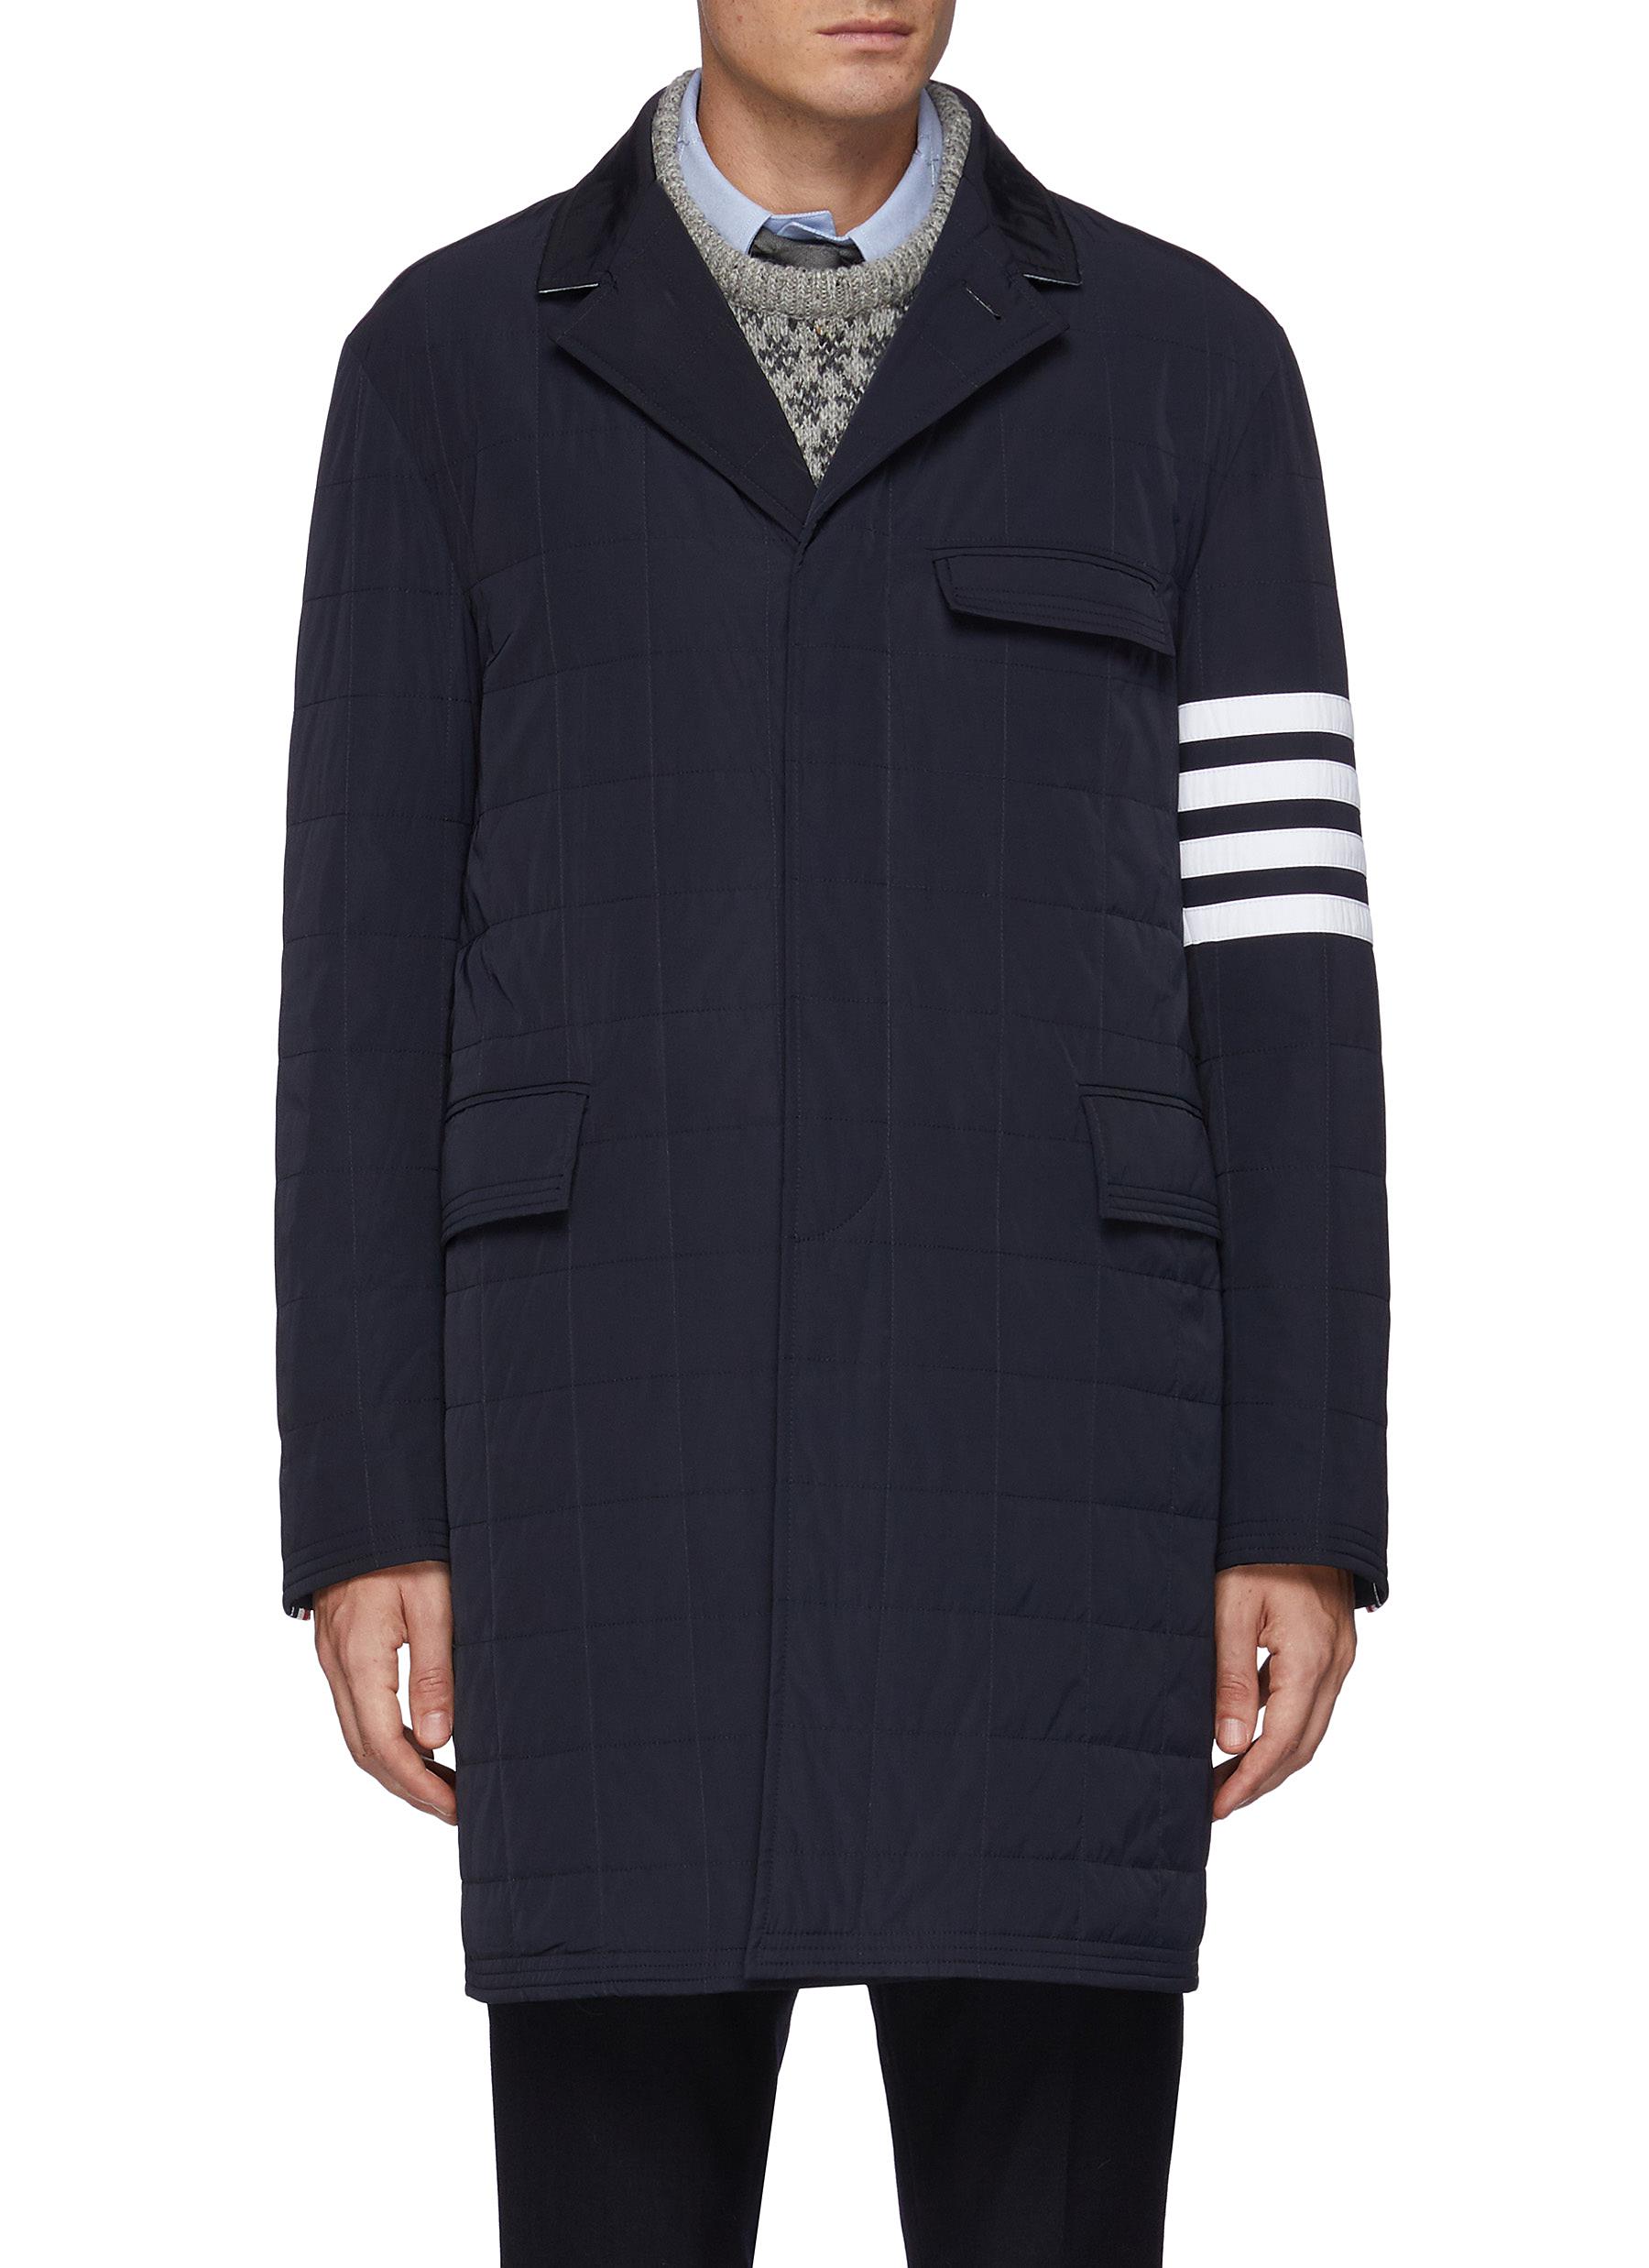 THOM BROWNE | Four Bar Stripe Quilted Chesterfield Coat | Men